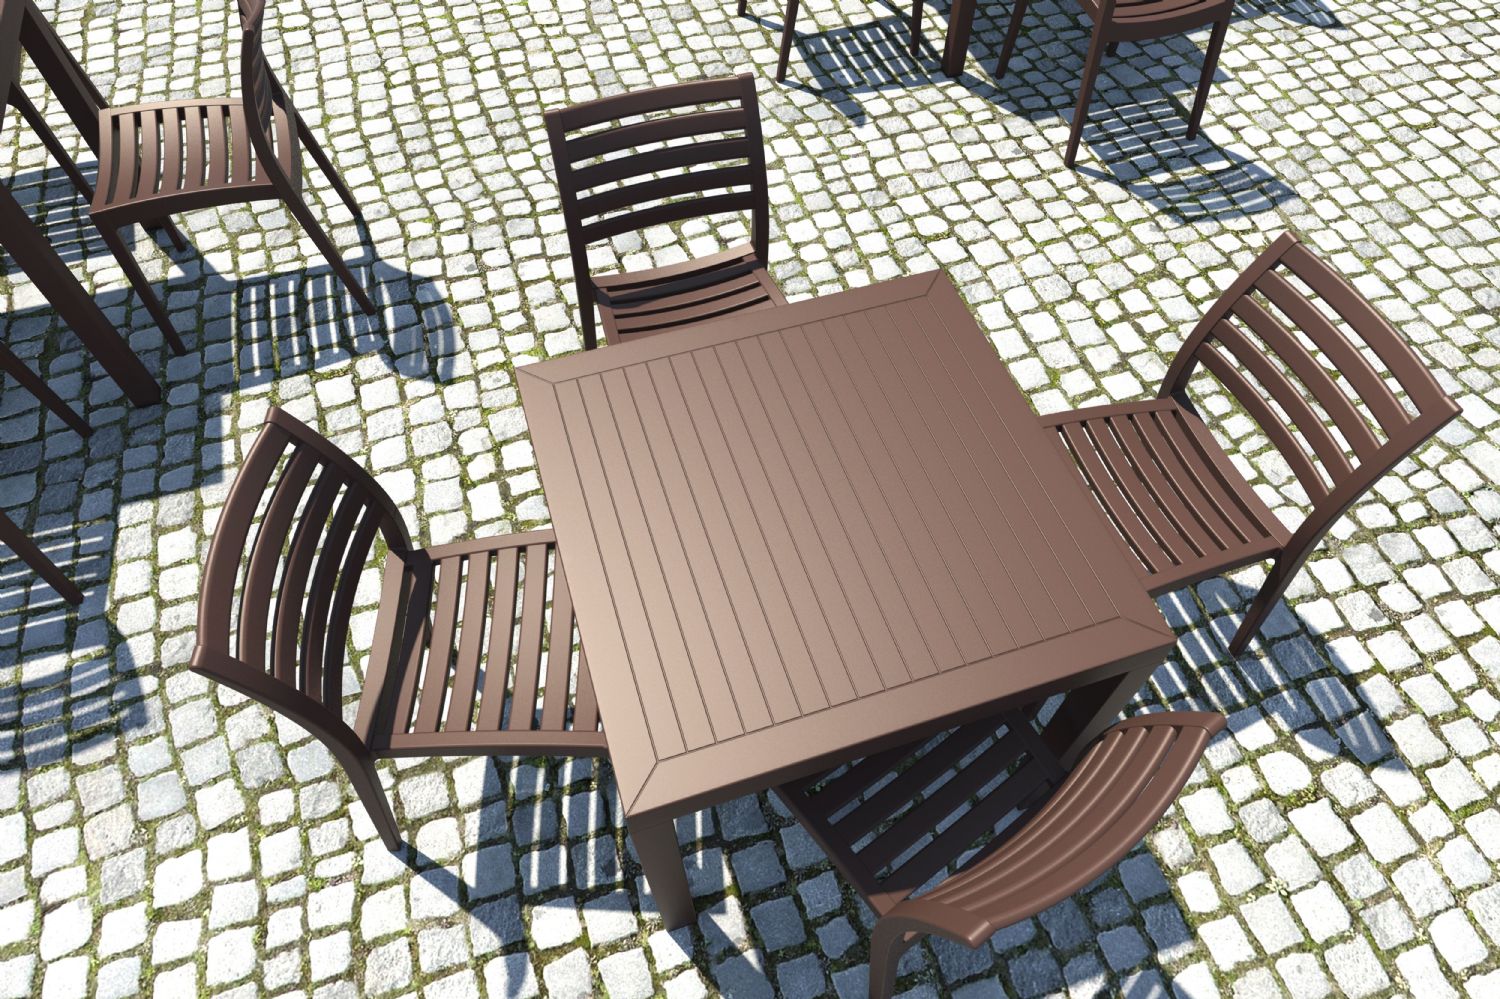 Ares Resin Square Outdoor Dining Set 5 Piece with Side Chairs Brown ISP1641S-BRW - 5